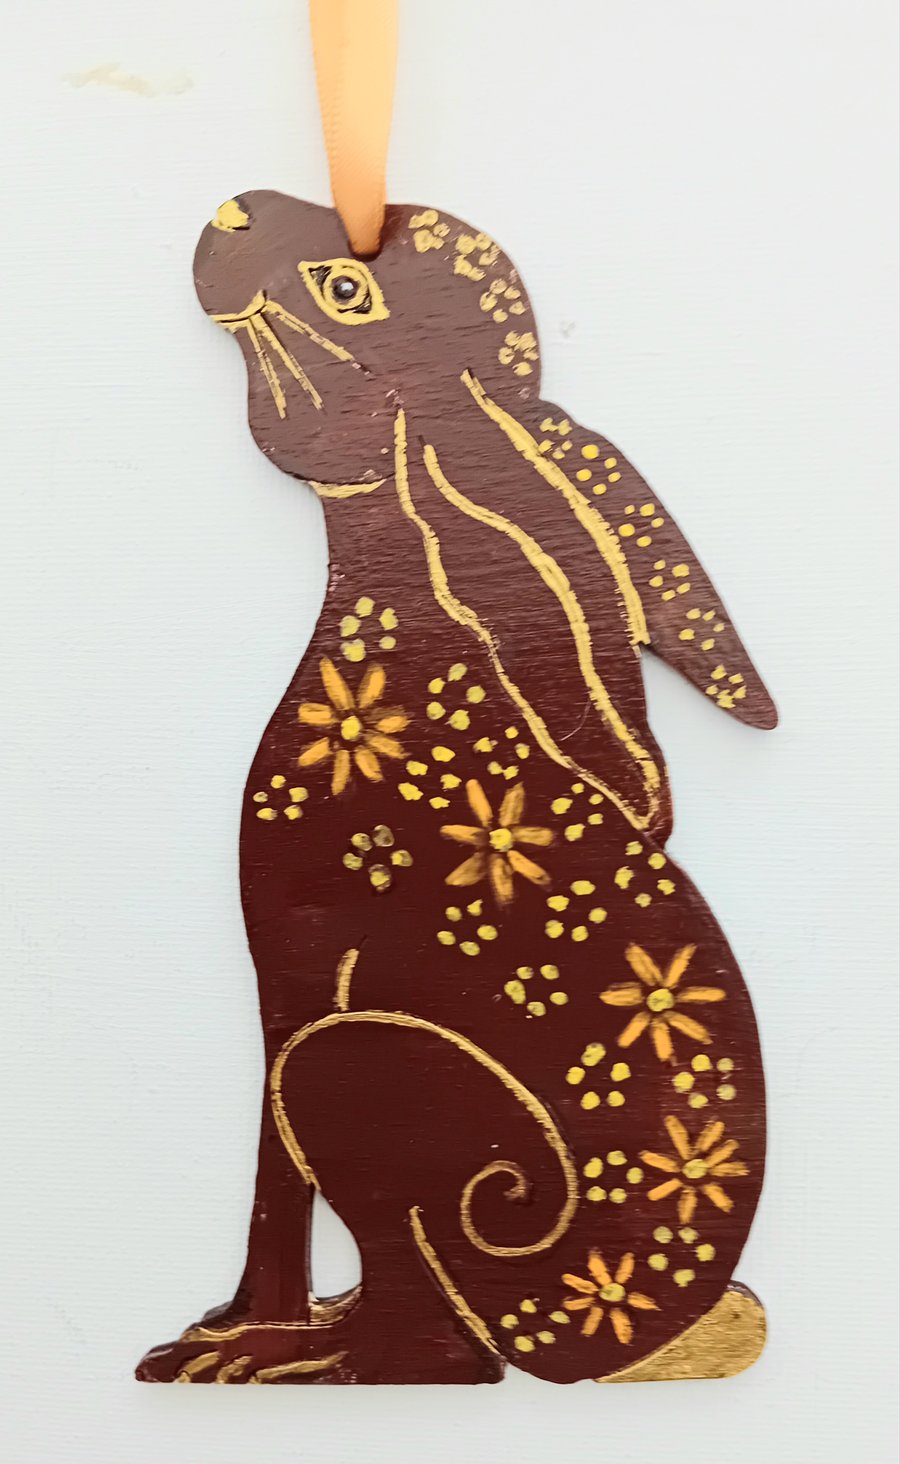 Hare shape in brown and gold